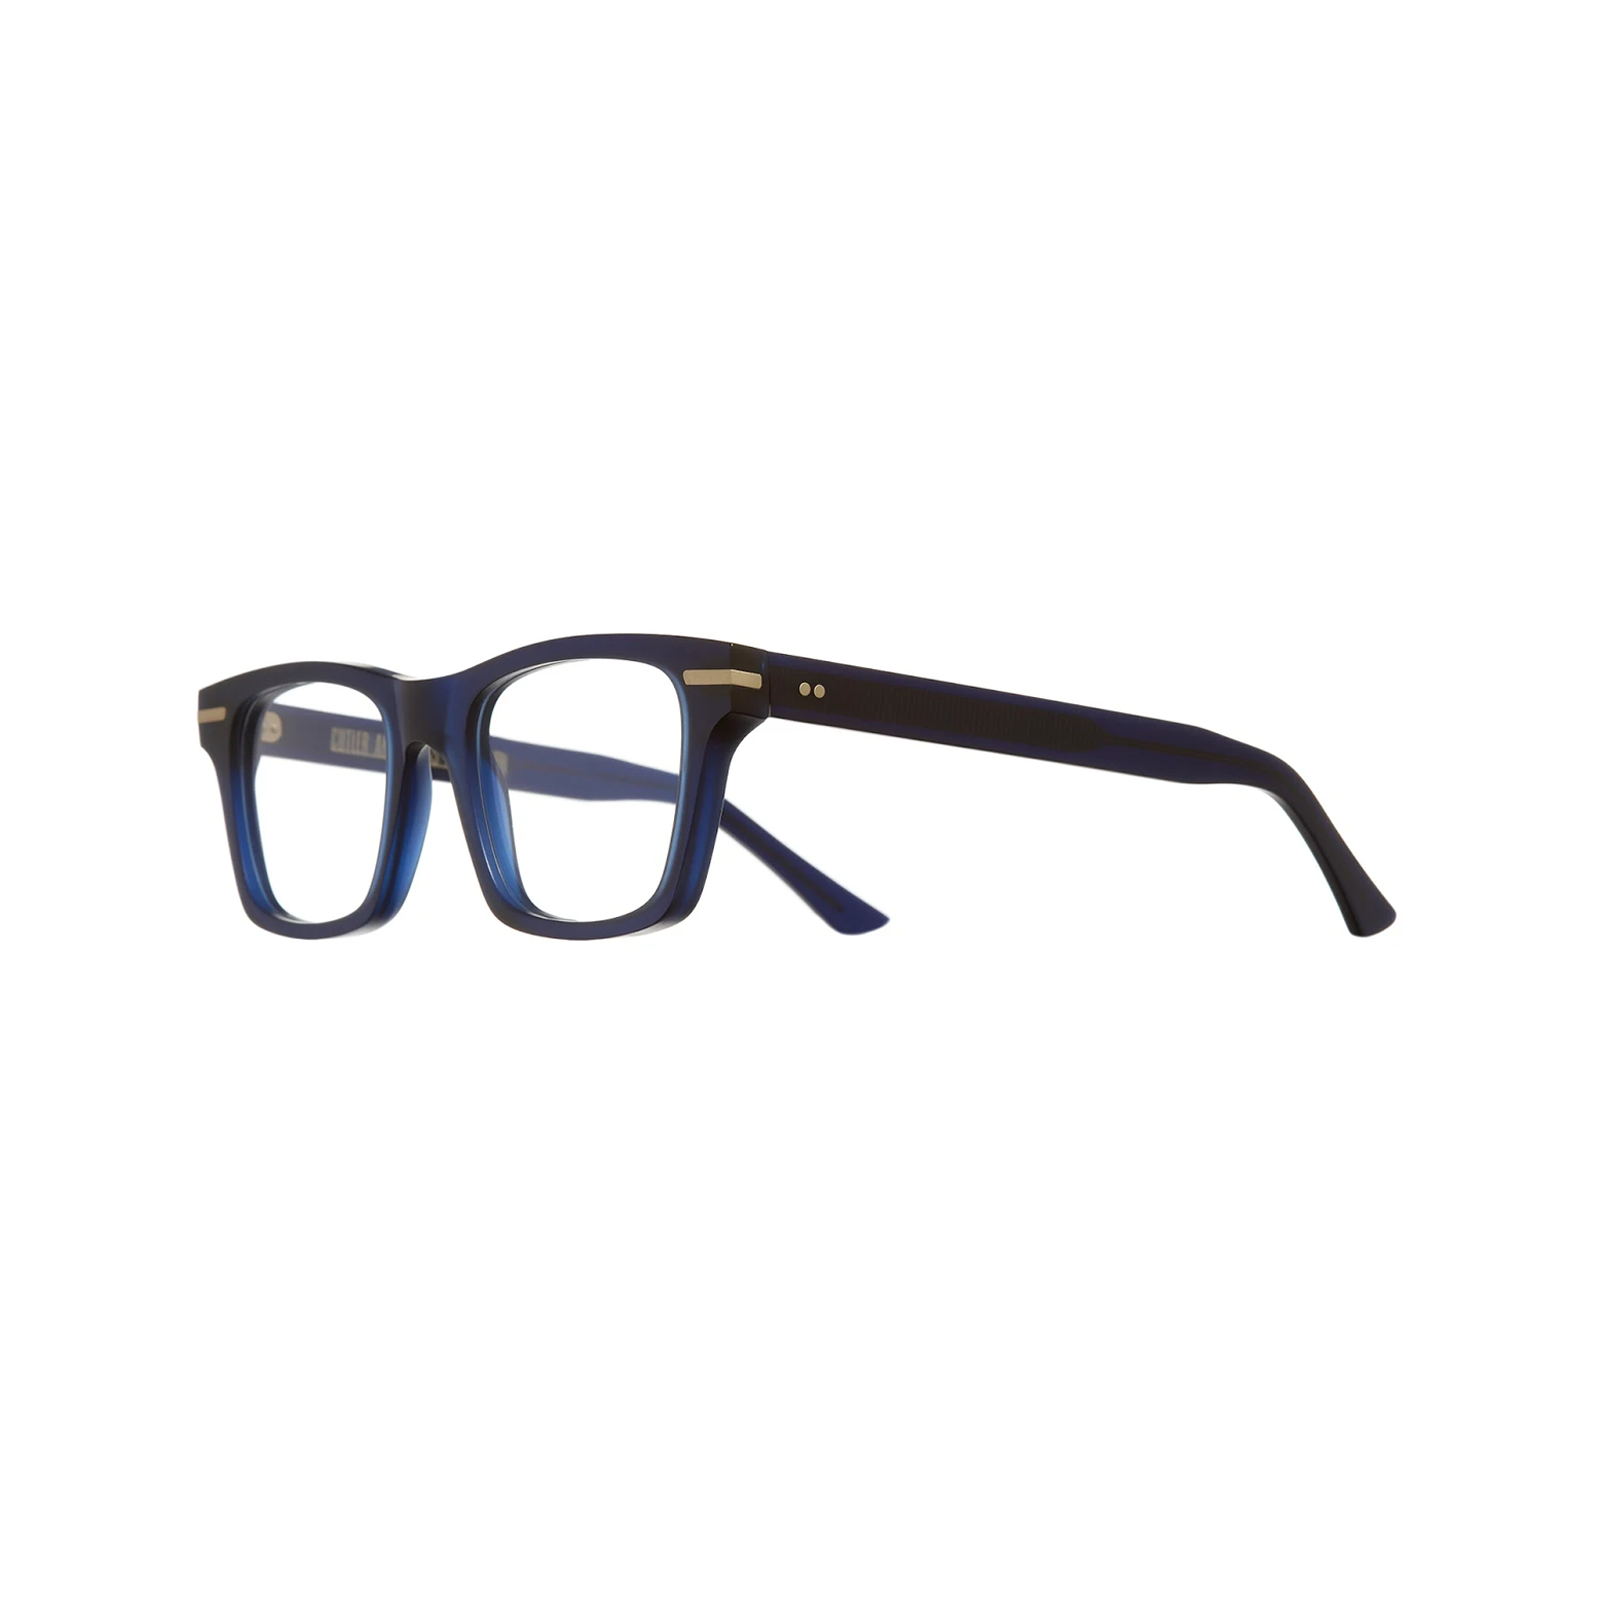 Cutler and Gross, 1337 Optical Rectangle Glasses - Classic Navy Blue